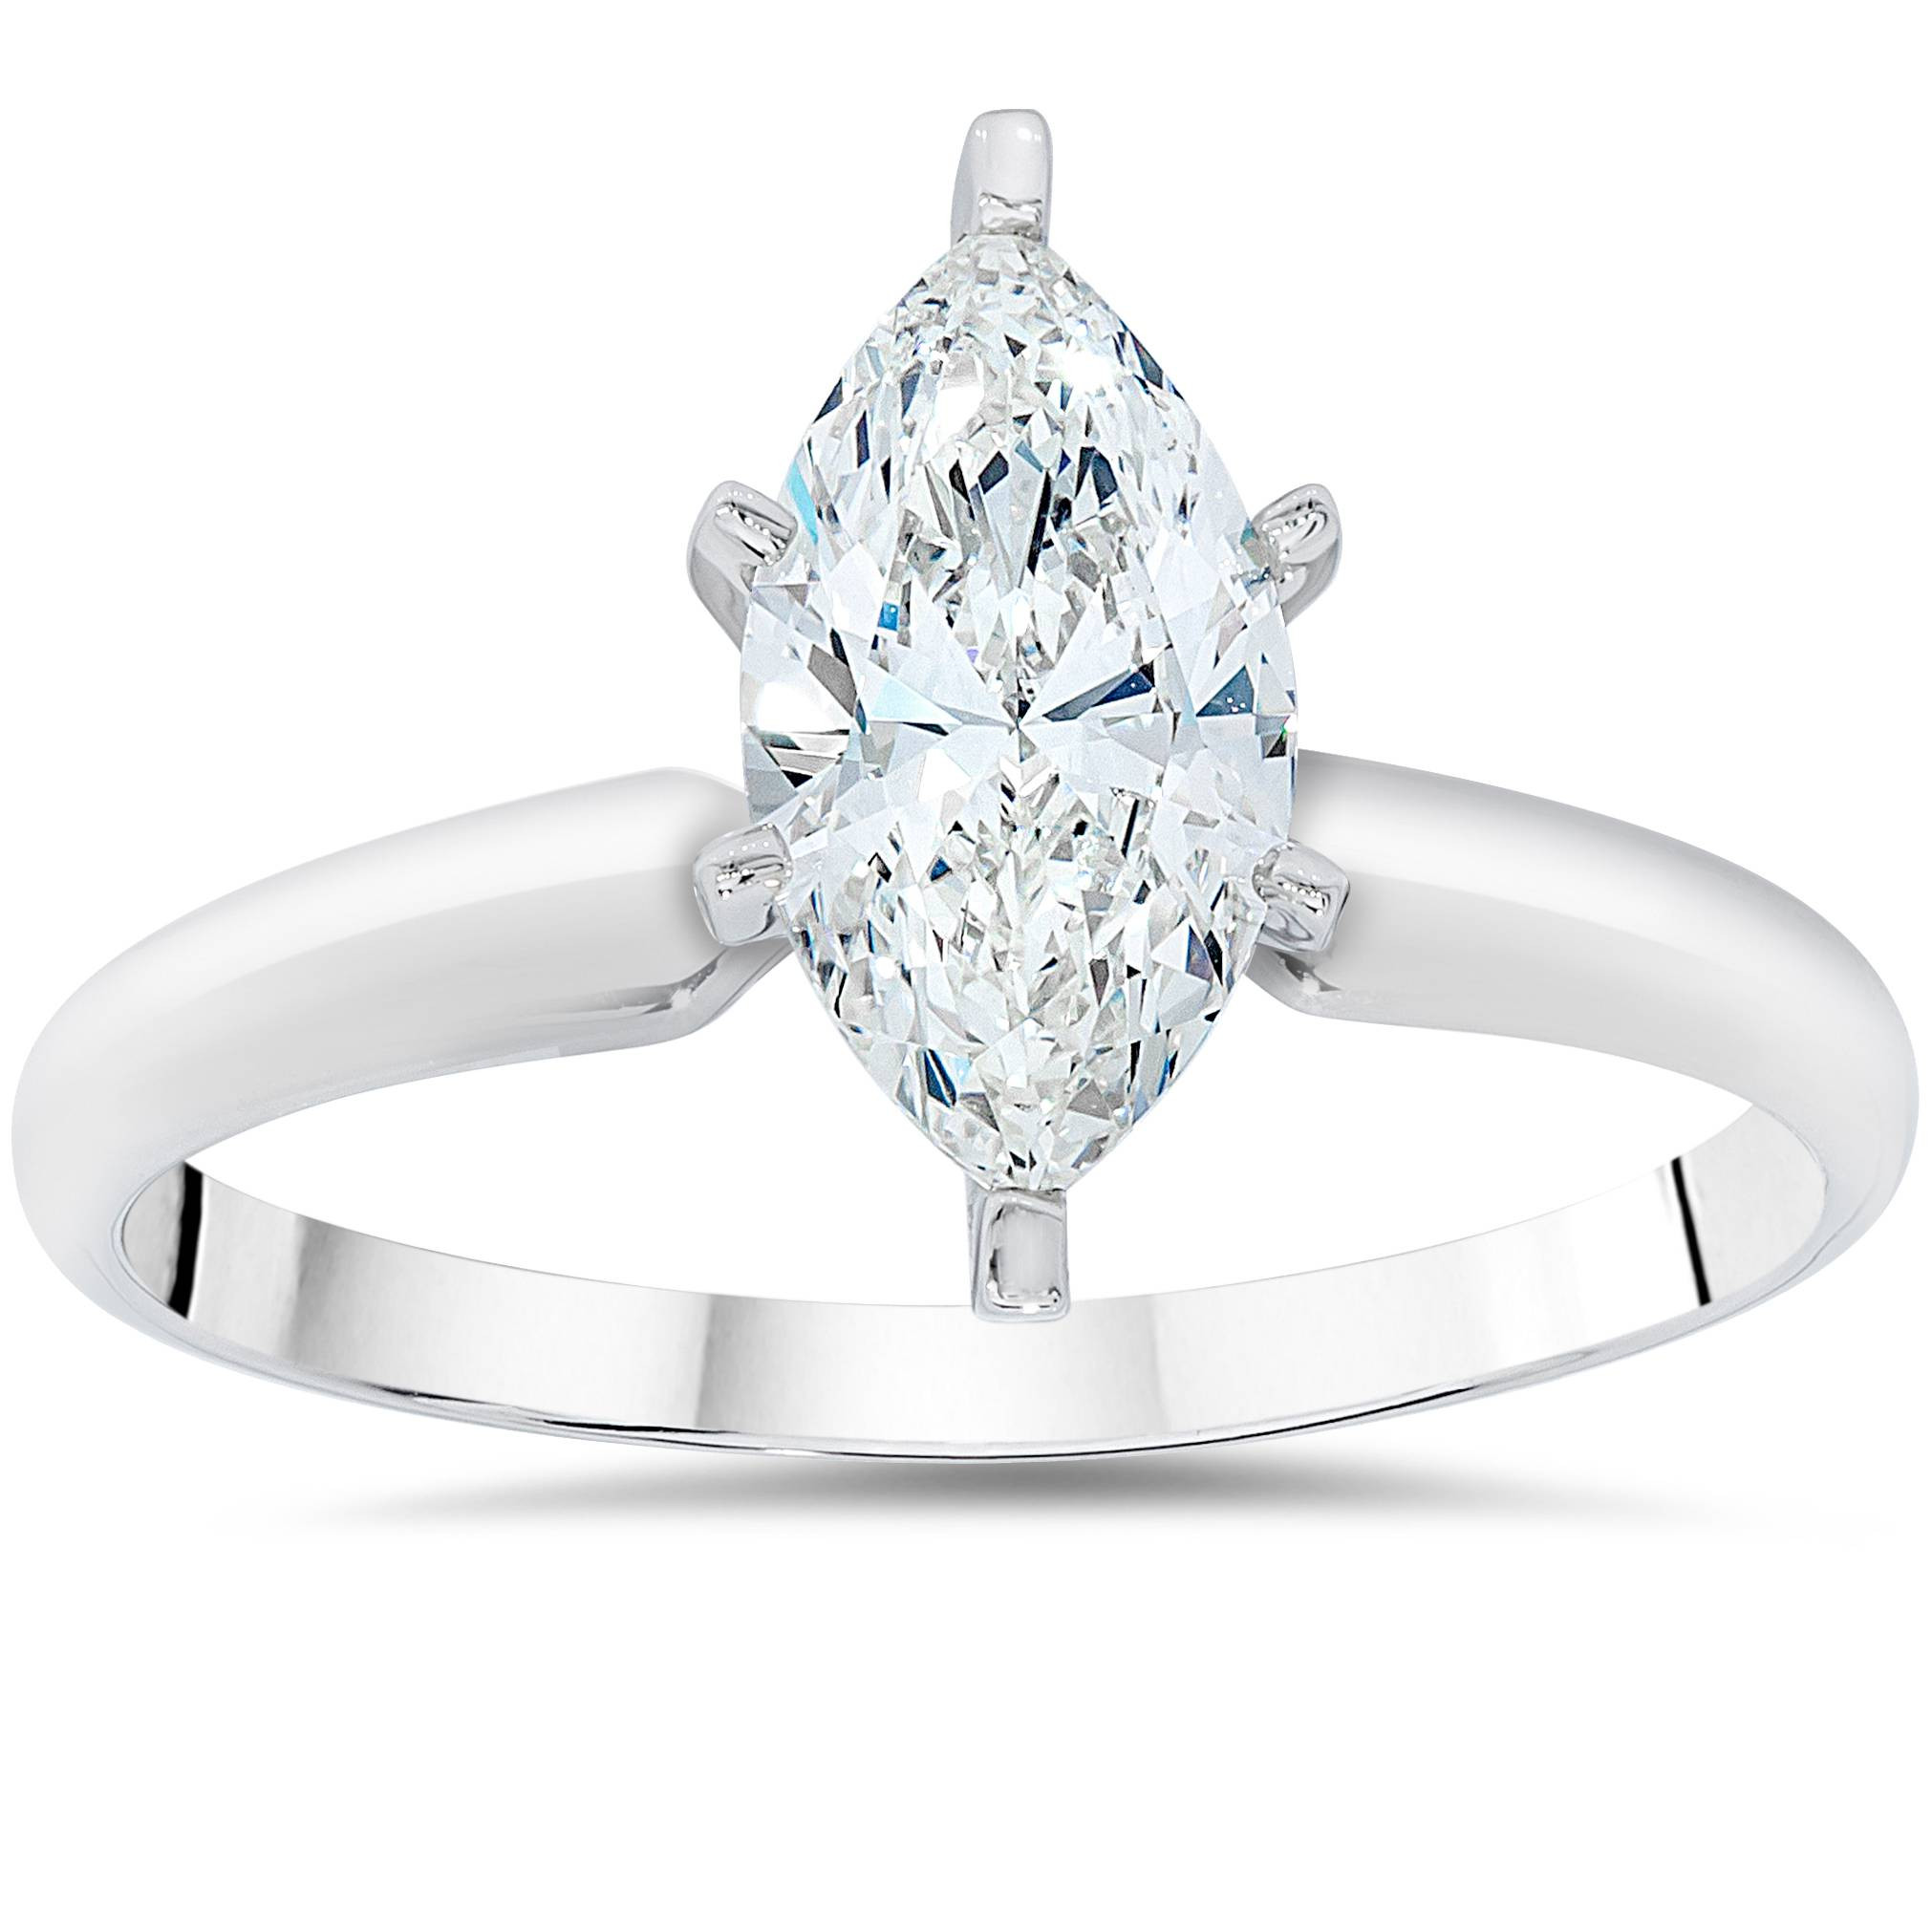 Marquise Diamond Rings
 1ct Solitaire Marquise Enhanced Diamond Engagement Ring